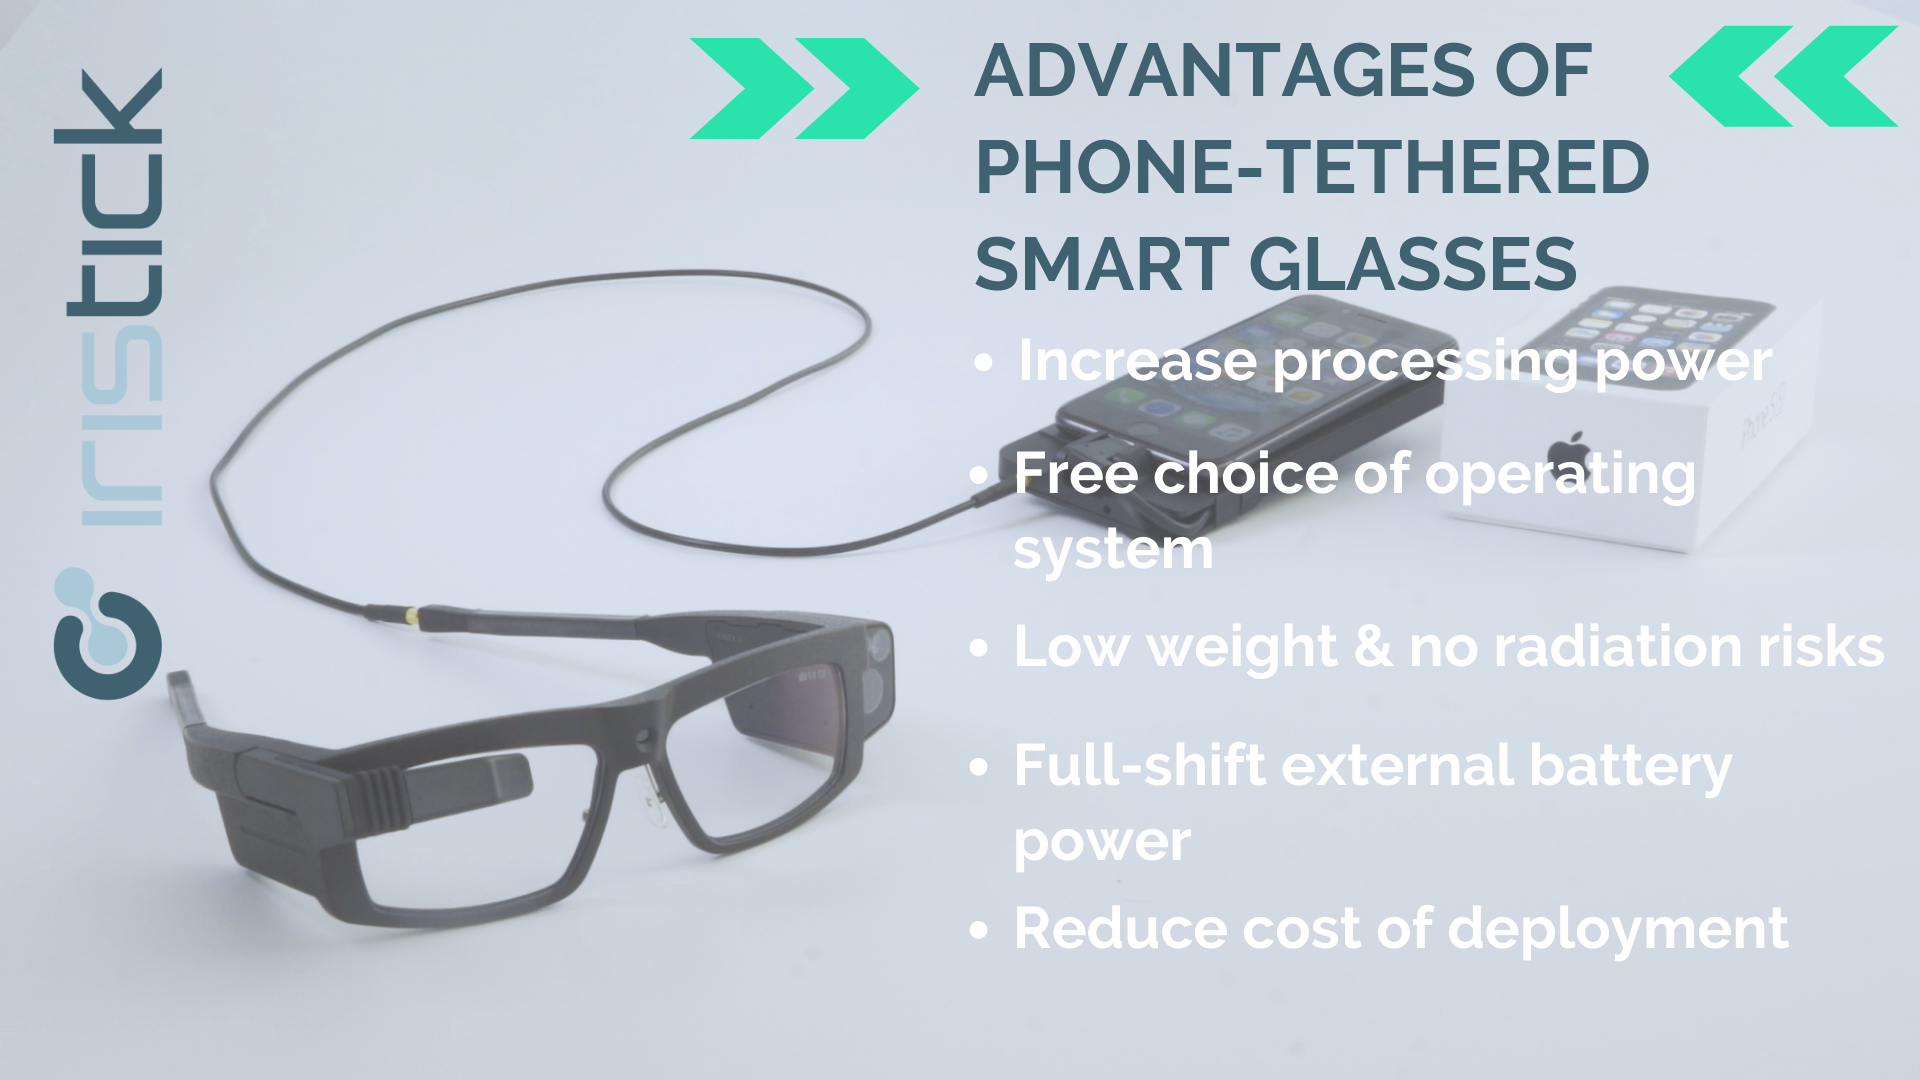 Advantages of phone-tethered smart glasses